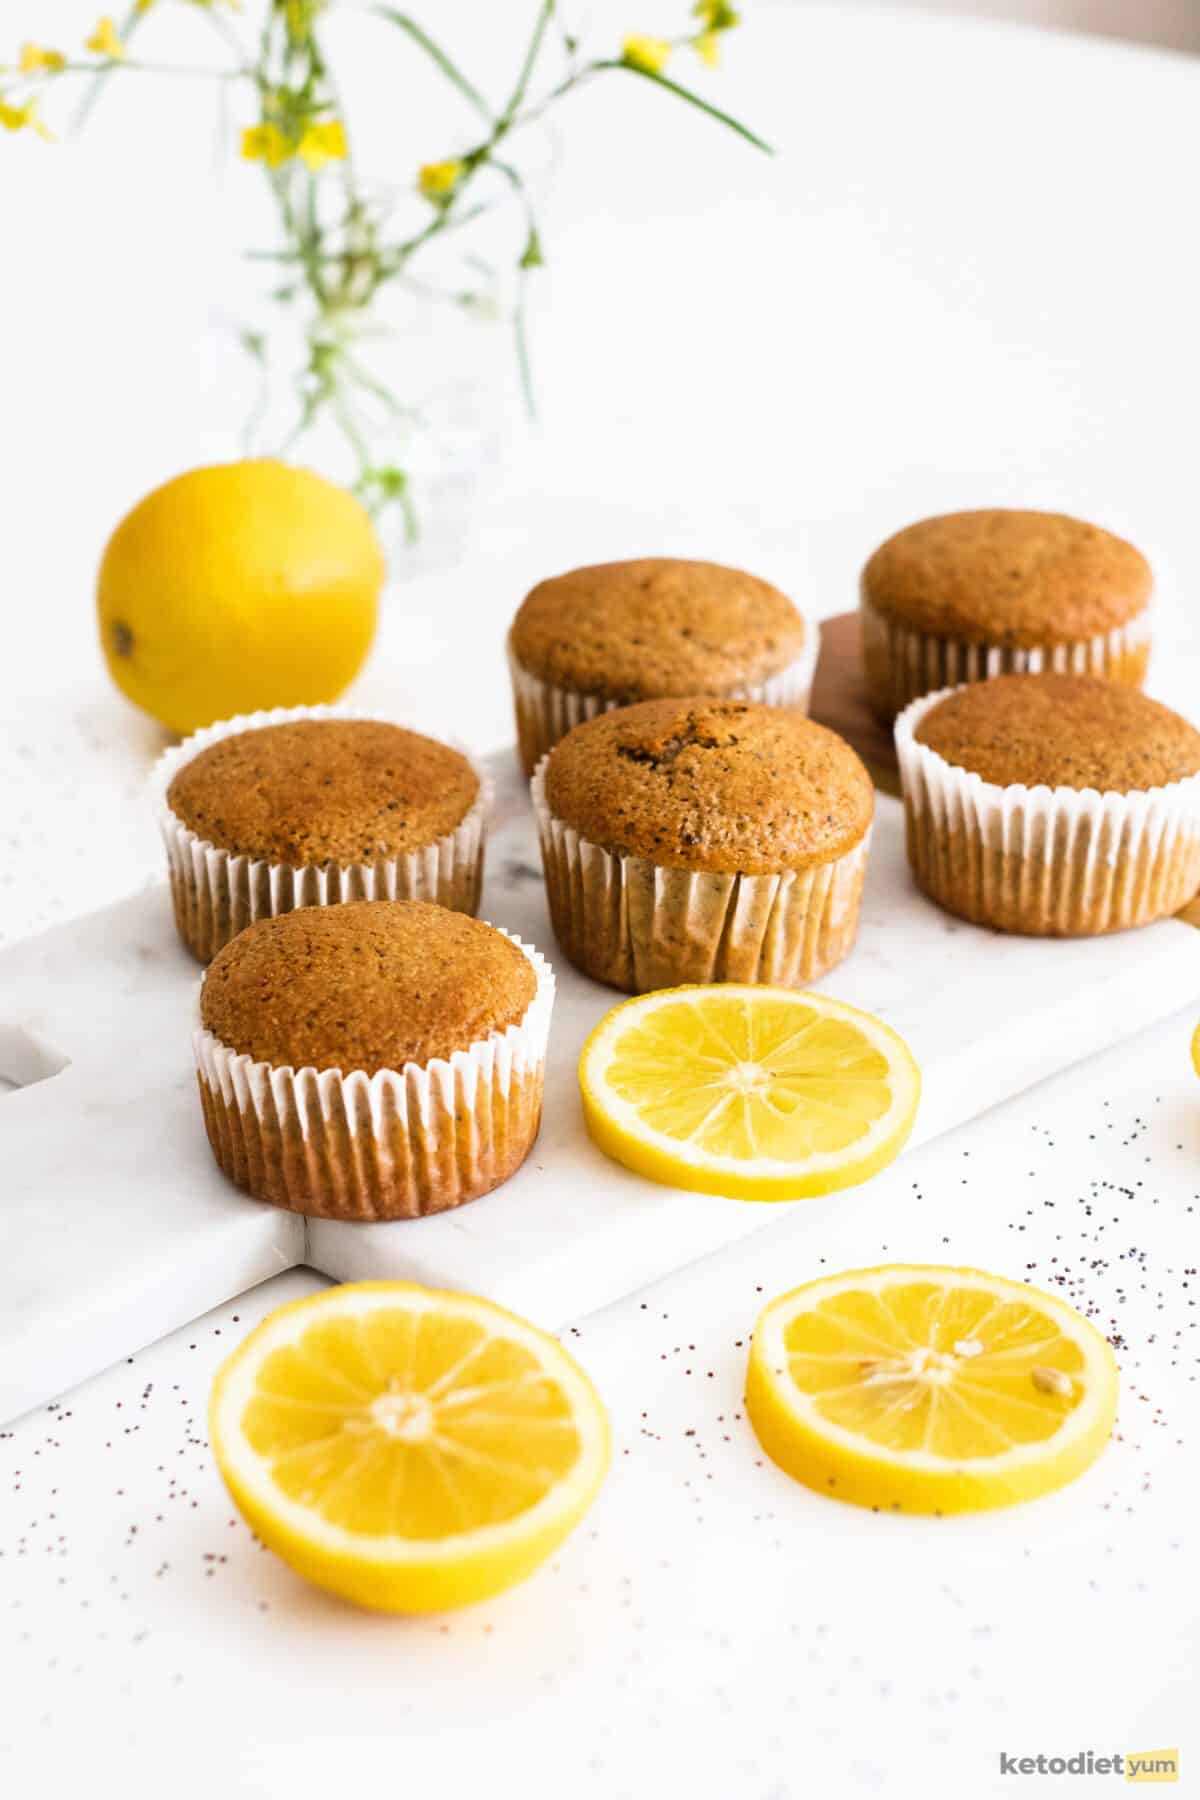 lemon poppy seed cupcakes - cupcakes on a table ready for frosting